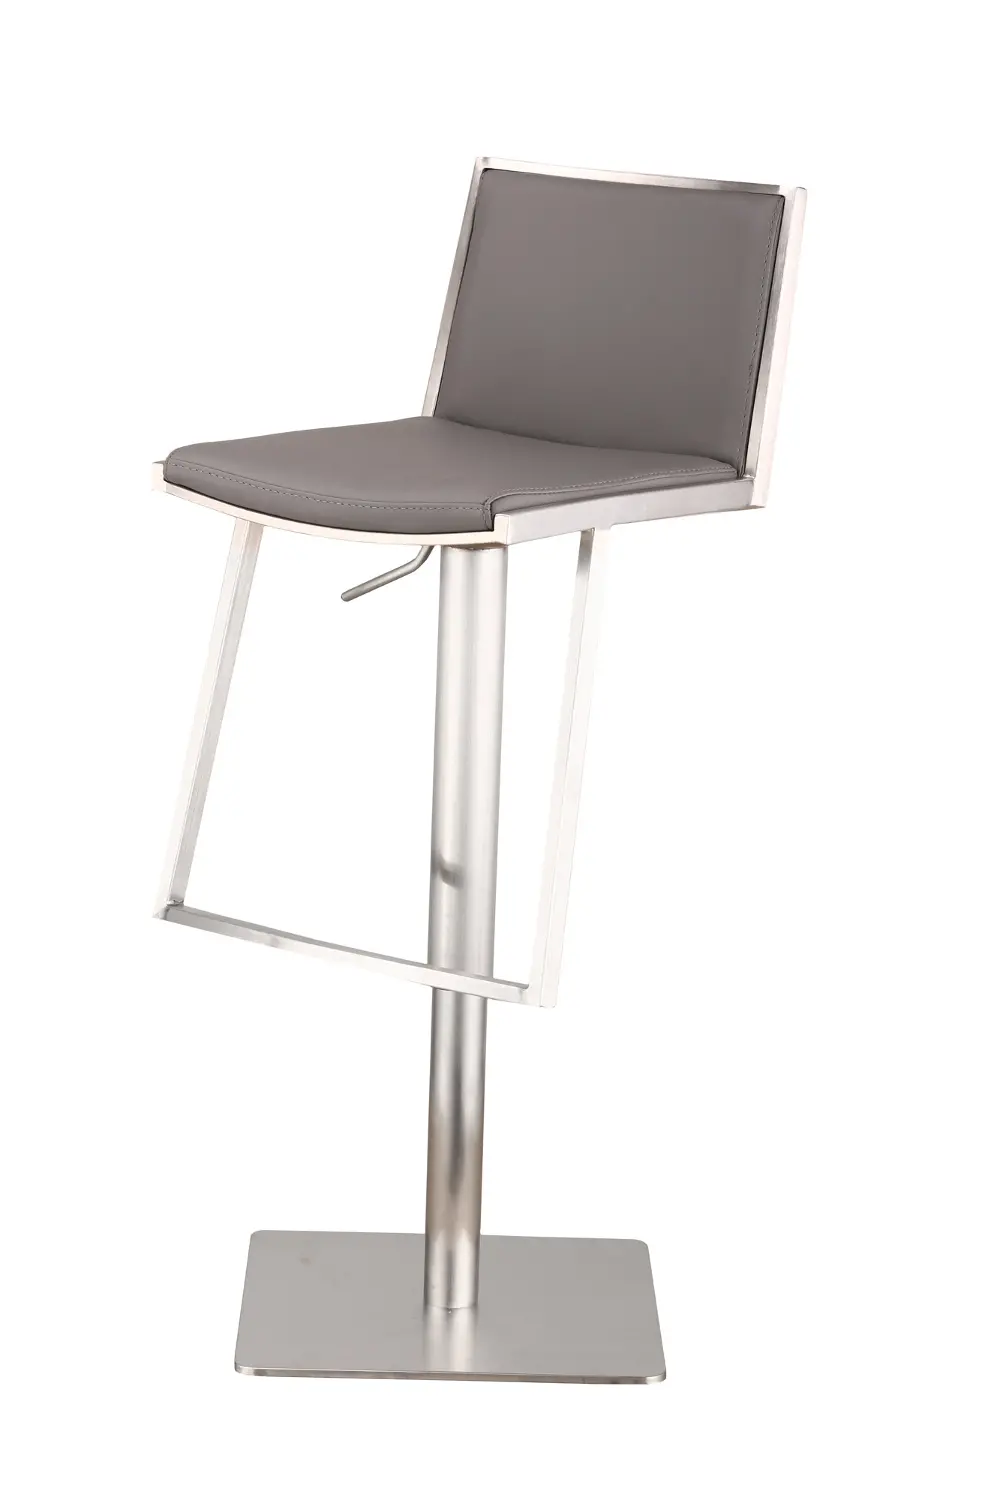 LCIBSWBAGRB201 Modern Stainless Steel and Gray Adjustable Bar Stool - Ibiza-1